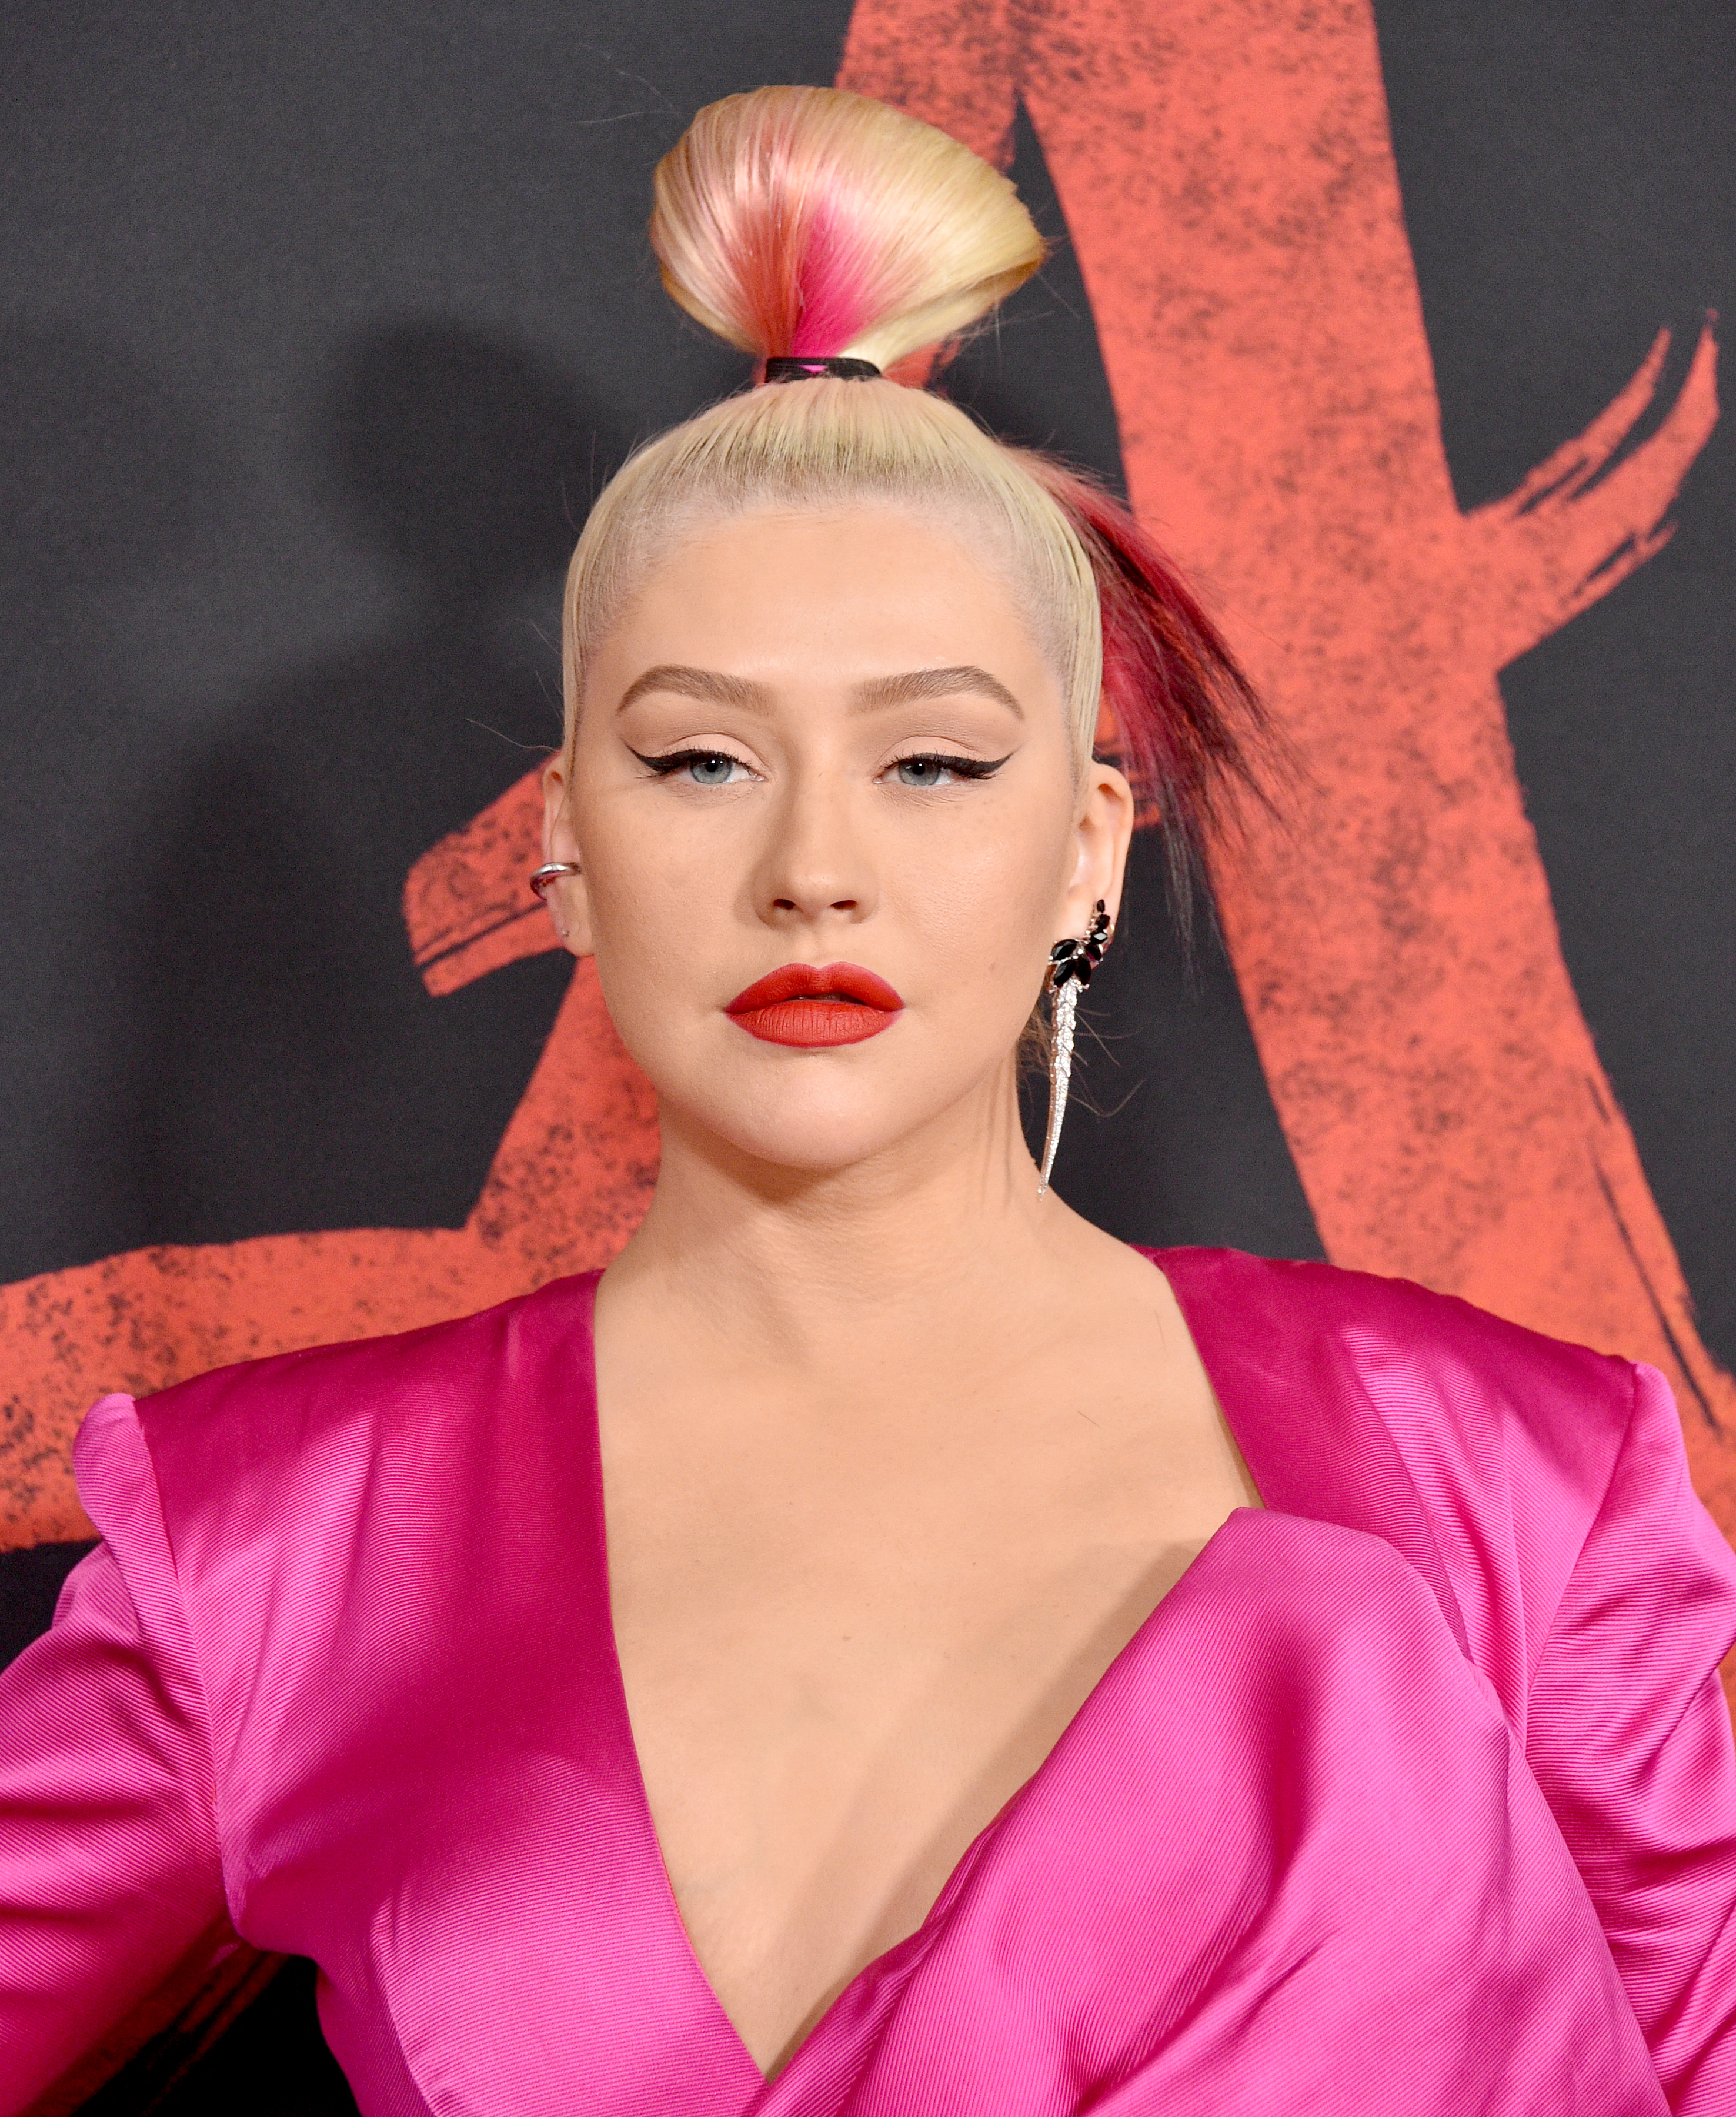 Christina Aguilera attends Disney's "Mulan" premiere on March 9, 2020, in Hollywood, California. | Source: Getty Images